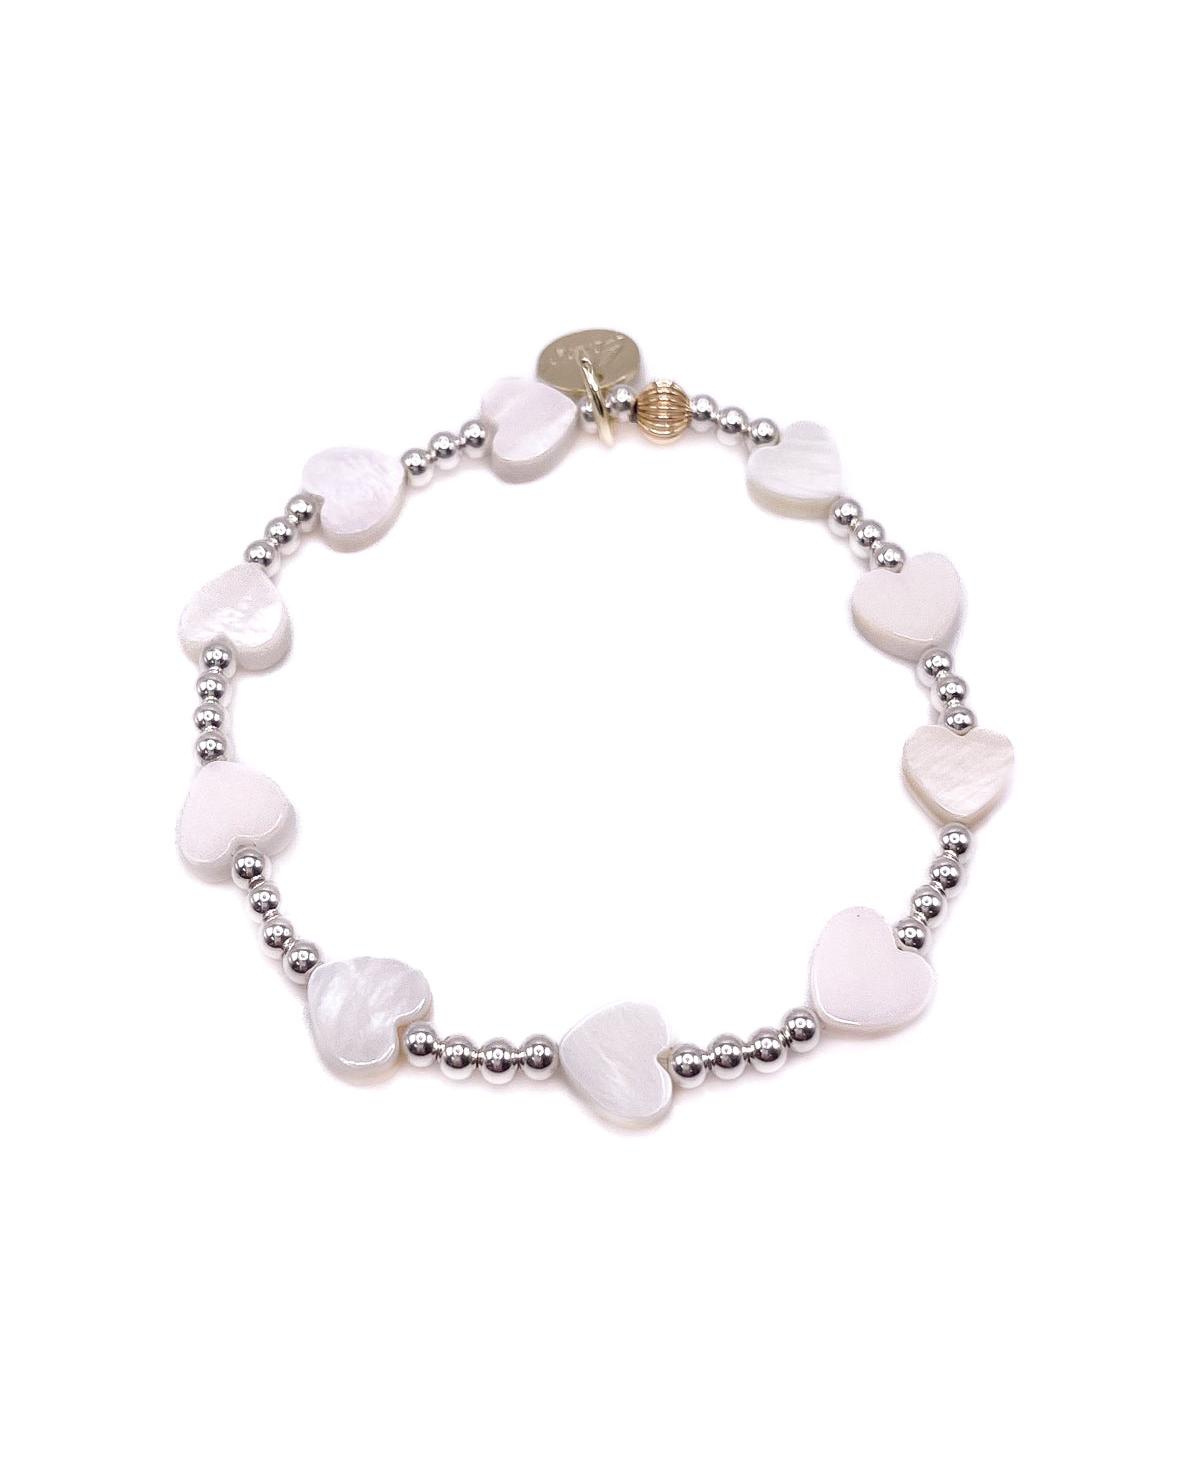 3mm Sterling Silver Ball and Mother of Pearl Heart Stretch Bracelet - Silver